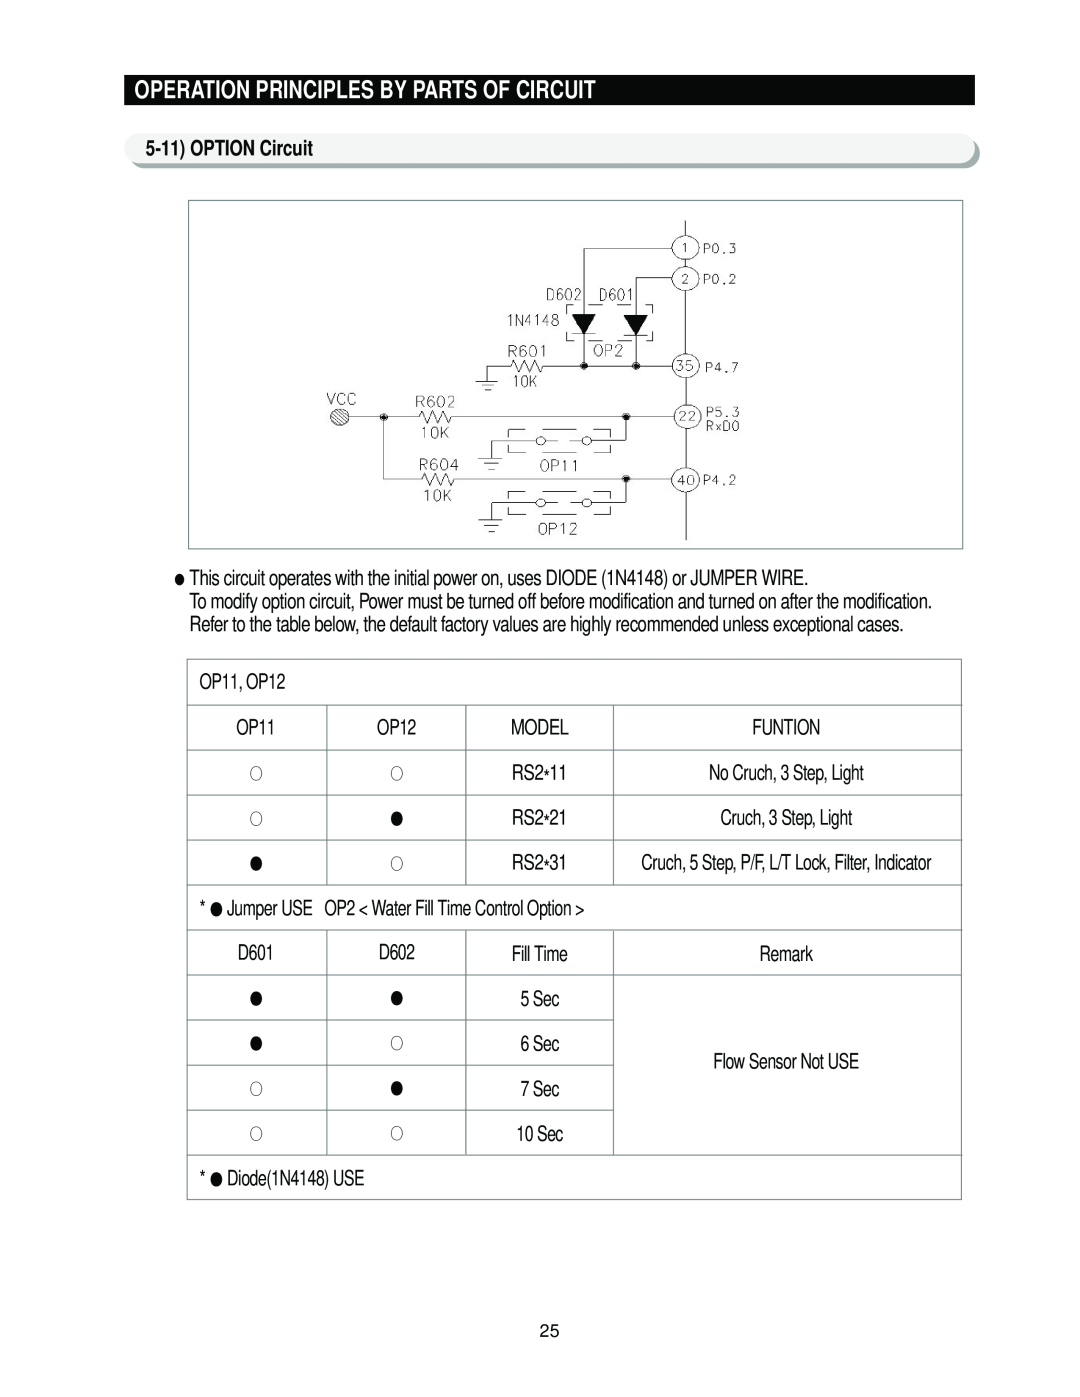 Samsung RS2*3* manual 5-11OPTION Circuit, Operation Principles By Parts Of Circuit 